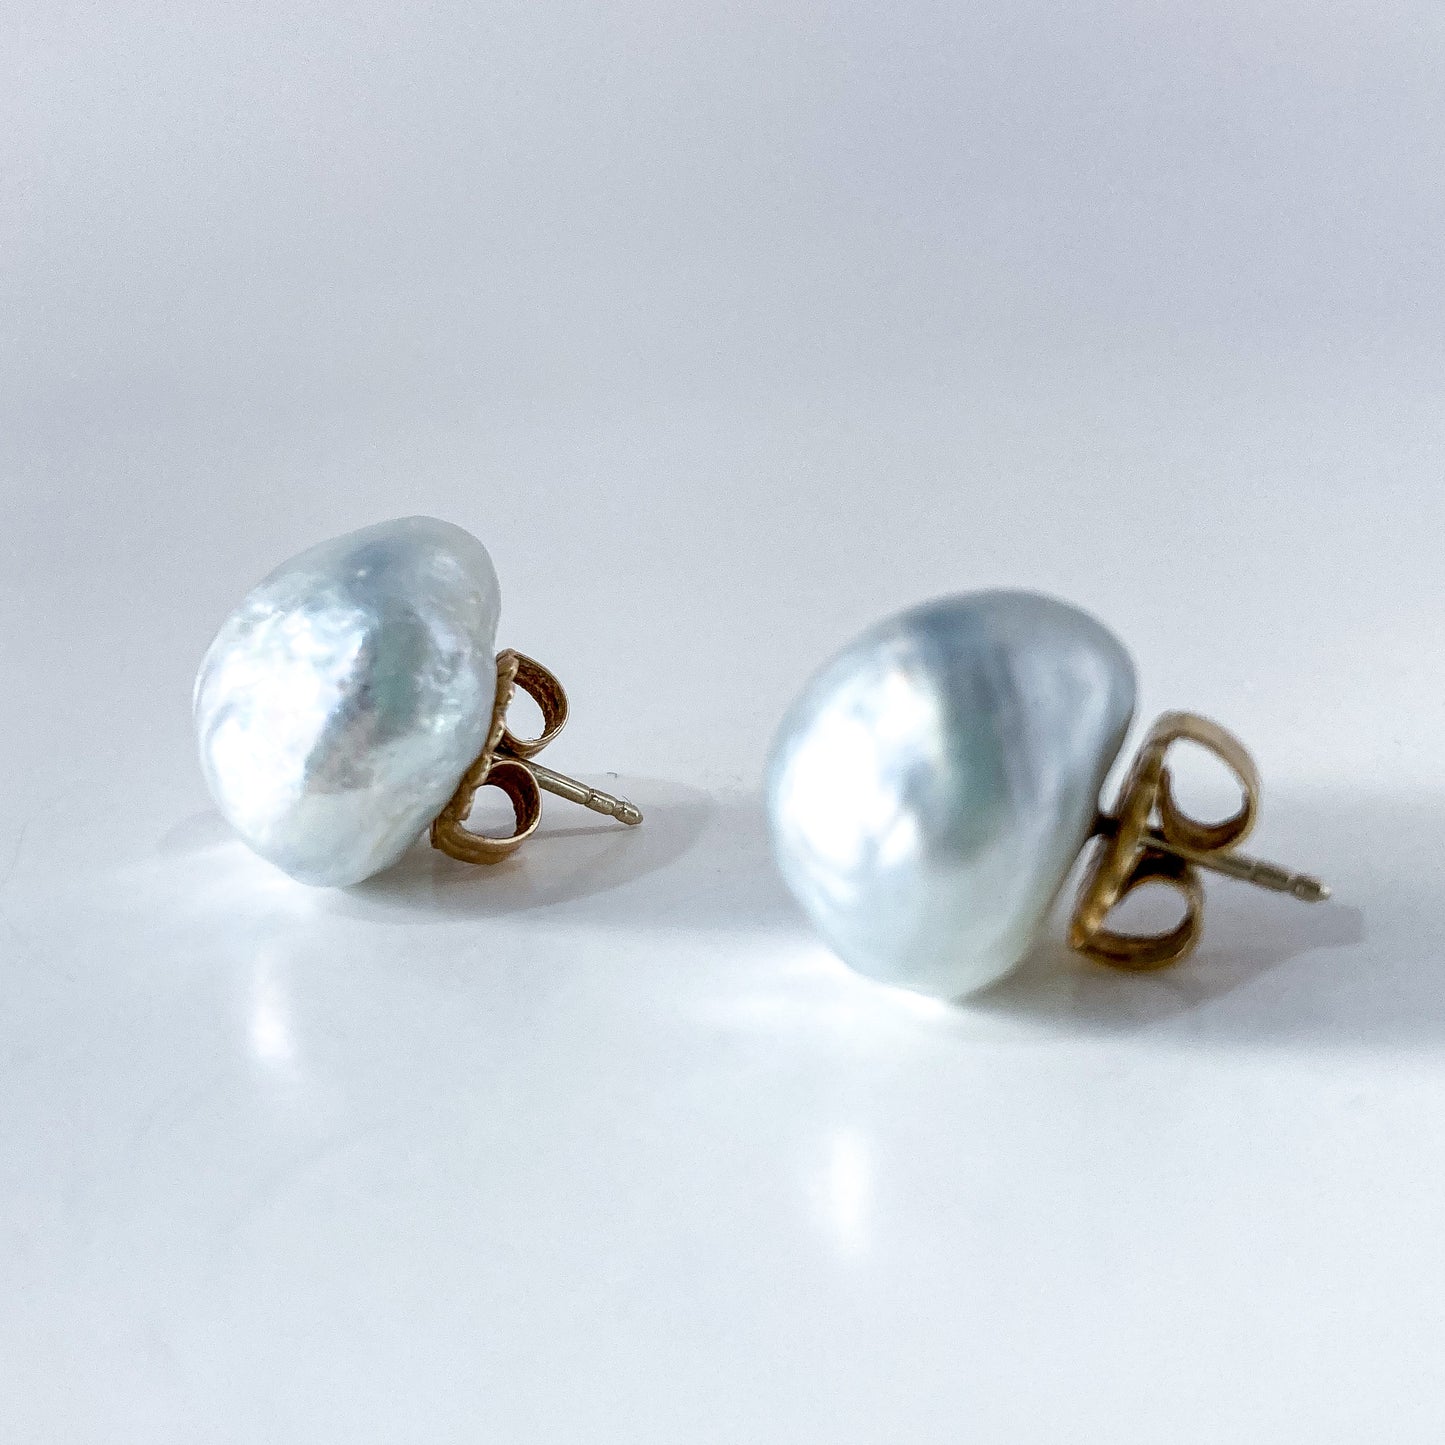 Vintage 14K Yellow Gold Large Silvery Blue Keshi Pearl Post Earrings Sides